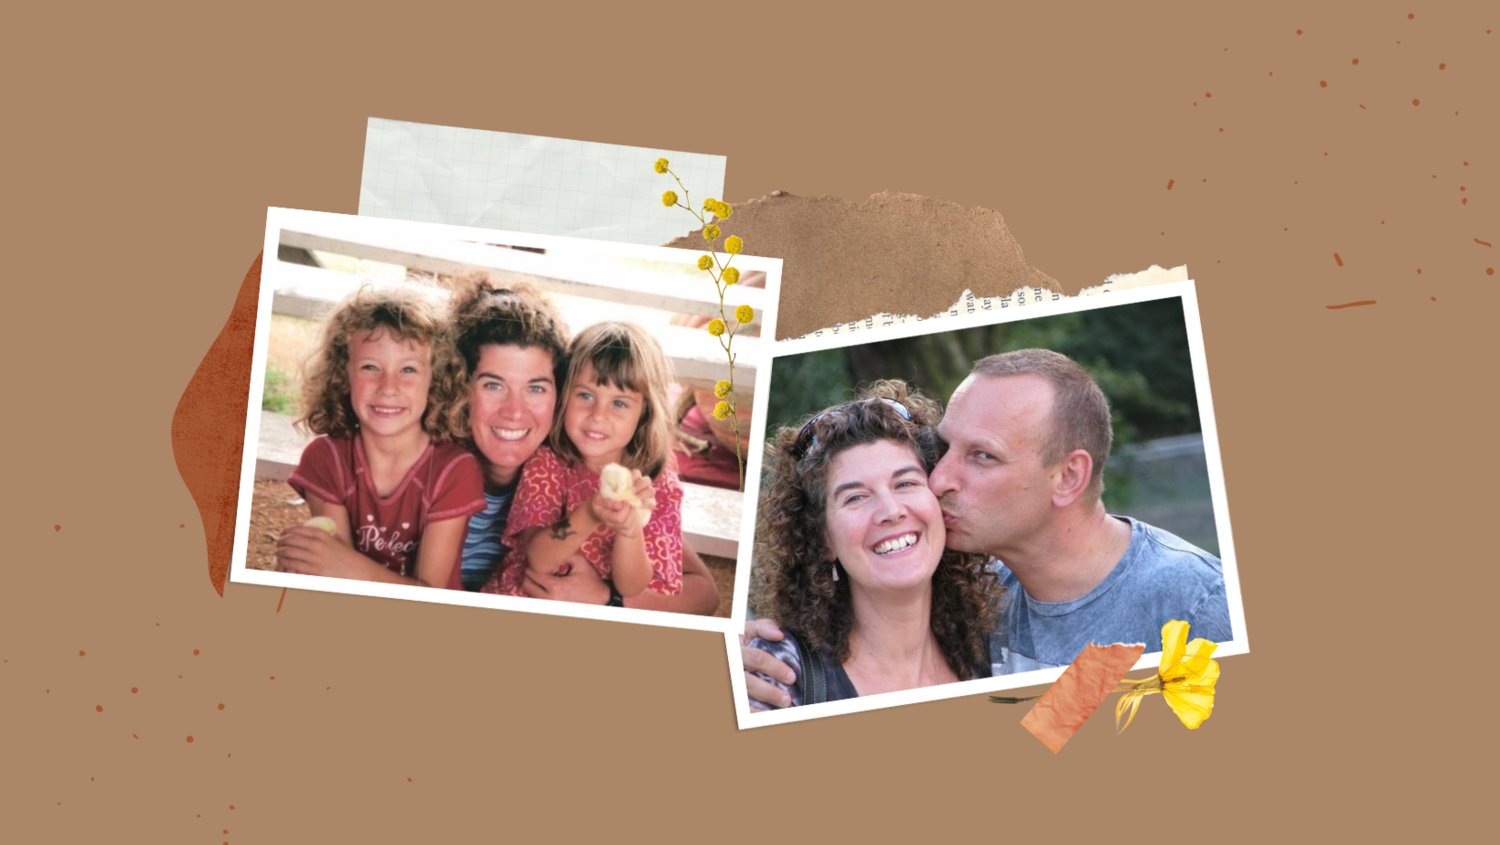 Karen Heilman, 55, passed away from an aggressive cancer on Sept. 9. She's pictured here with her daughters, Becca and Sara Heilman, and husband, Newt. They celebrated their 29th wedding anniversary on Aug. 1.